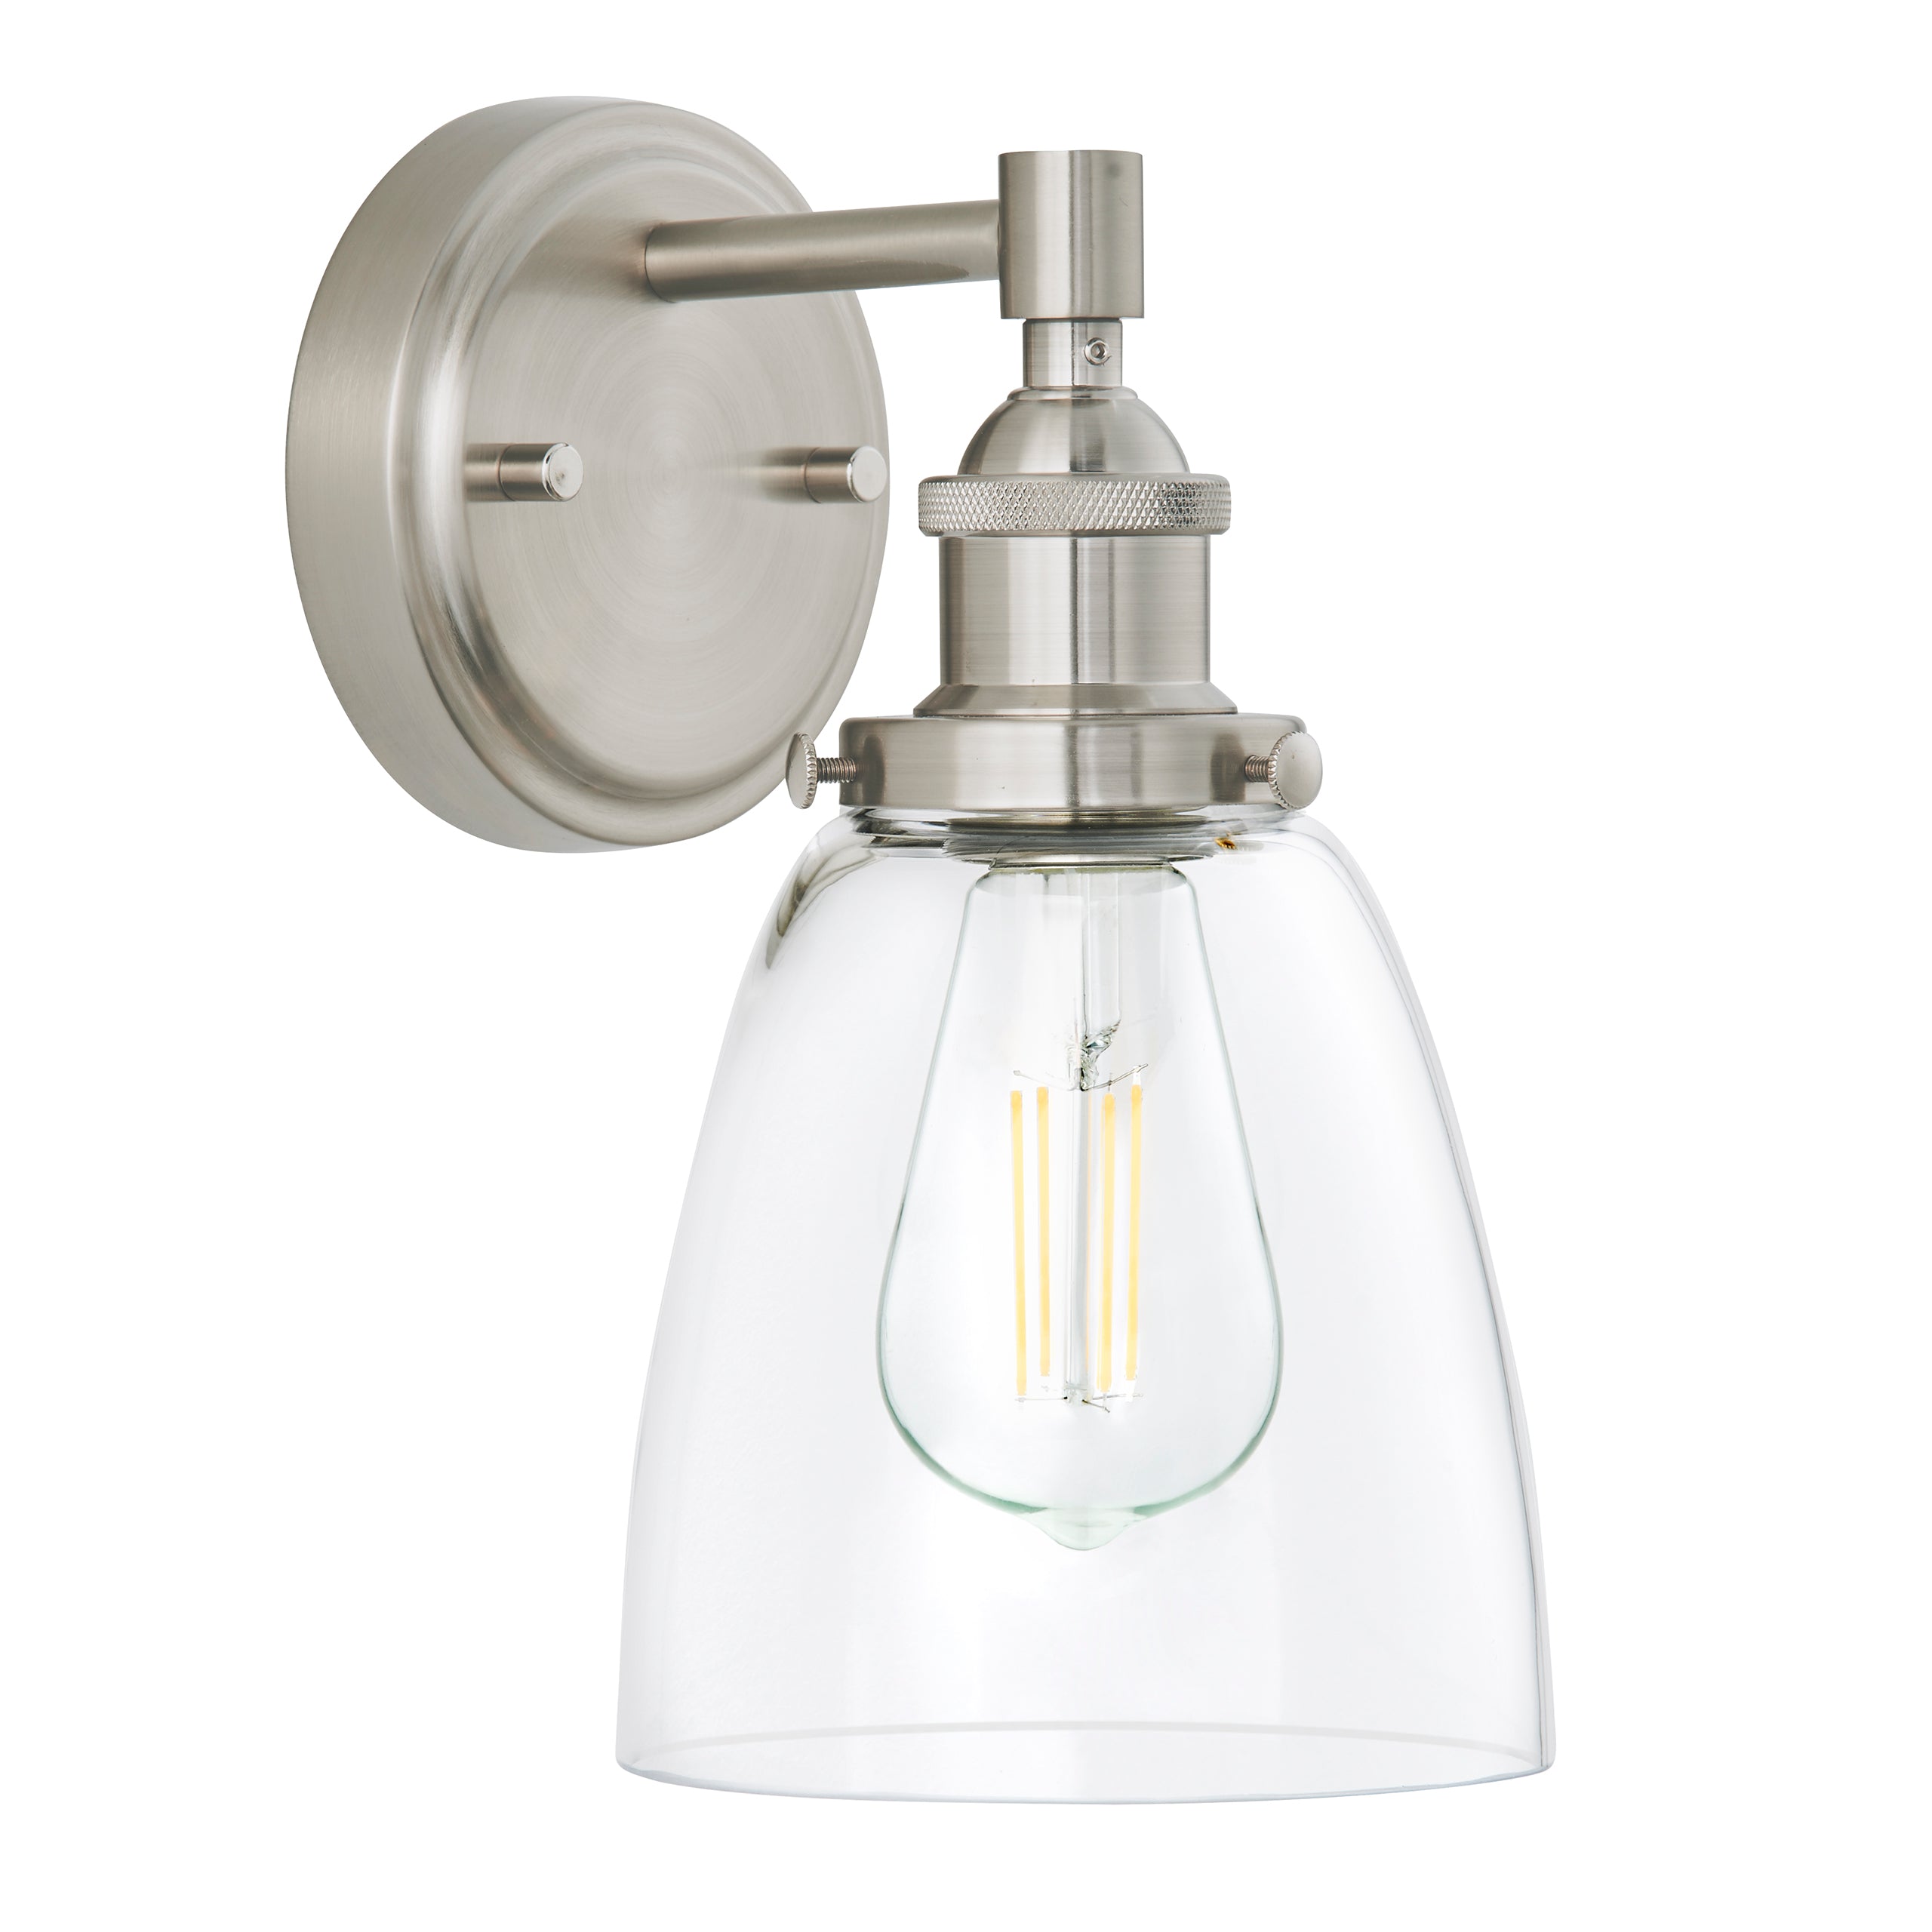 Fiorentino Industrial Wall Sconce Glass, LED bulb included | Linea Lighting Modern and Affordable Residential Lighting